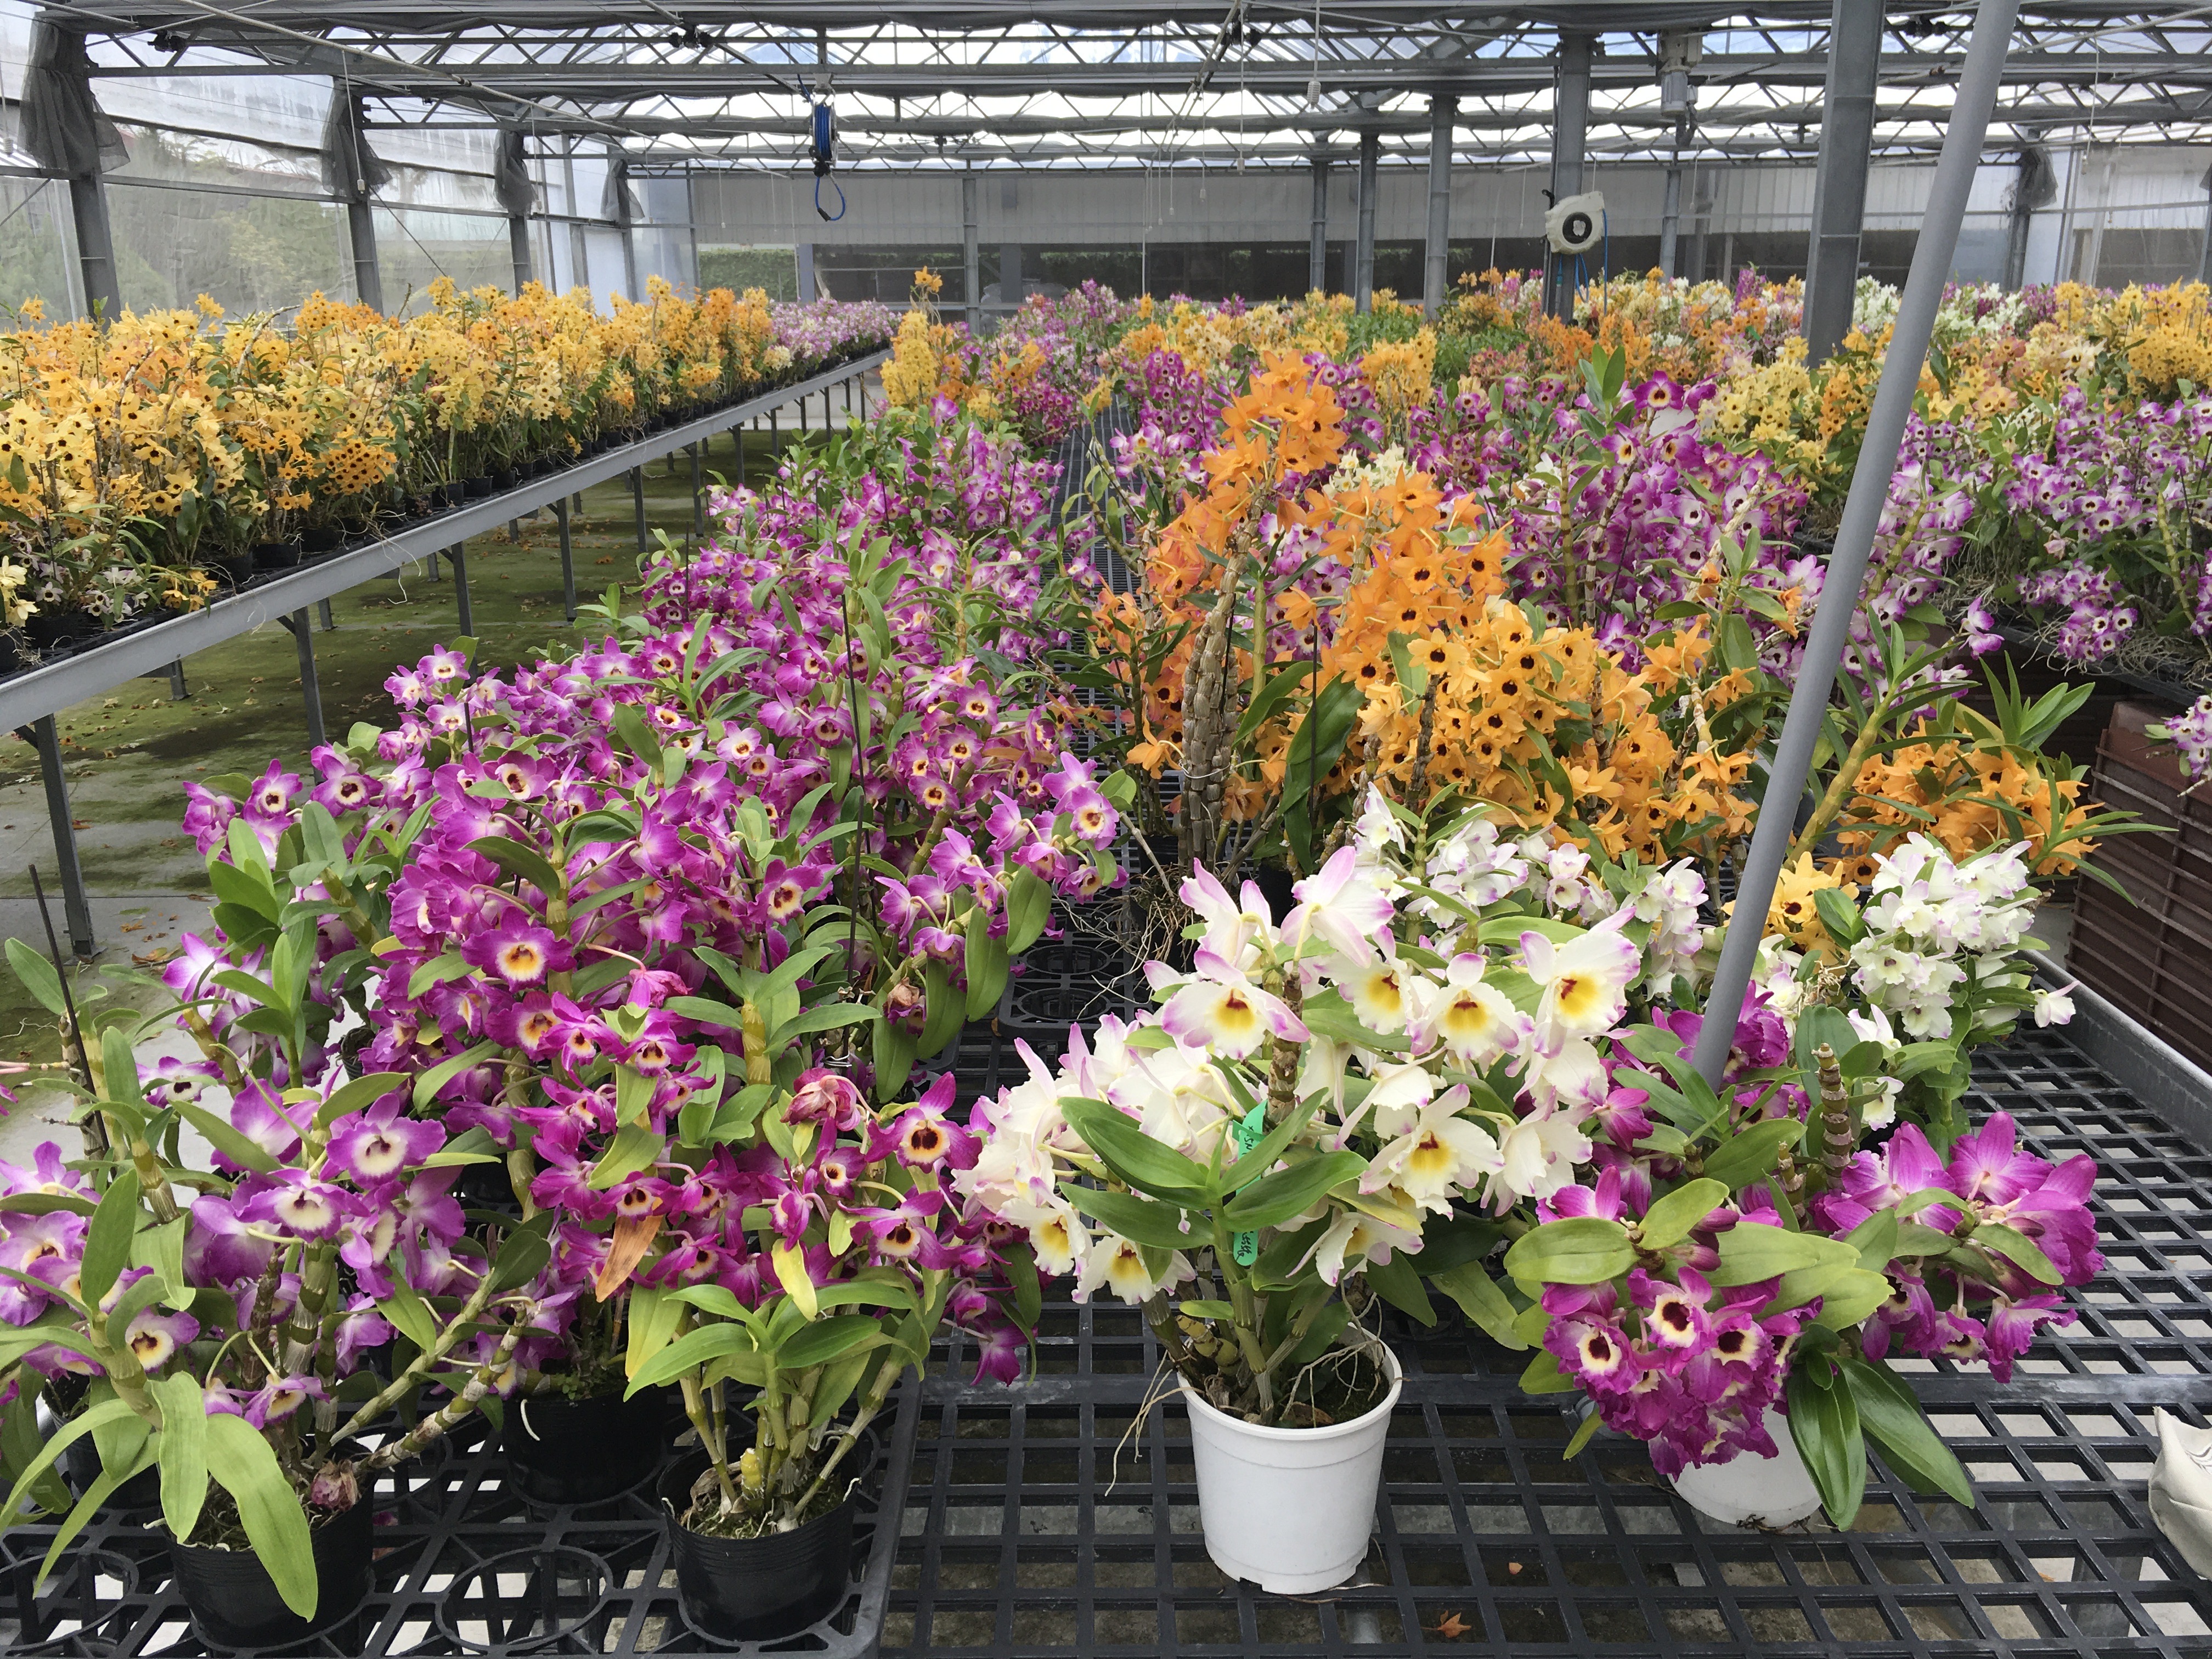 Fig. 6. The TTDARES has bred several varieties of red and yellow Dendrobium nobile and looks forward to working with those in the flower sector to promote the thriving development of the Dendrobium nobile industry.